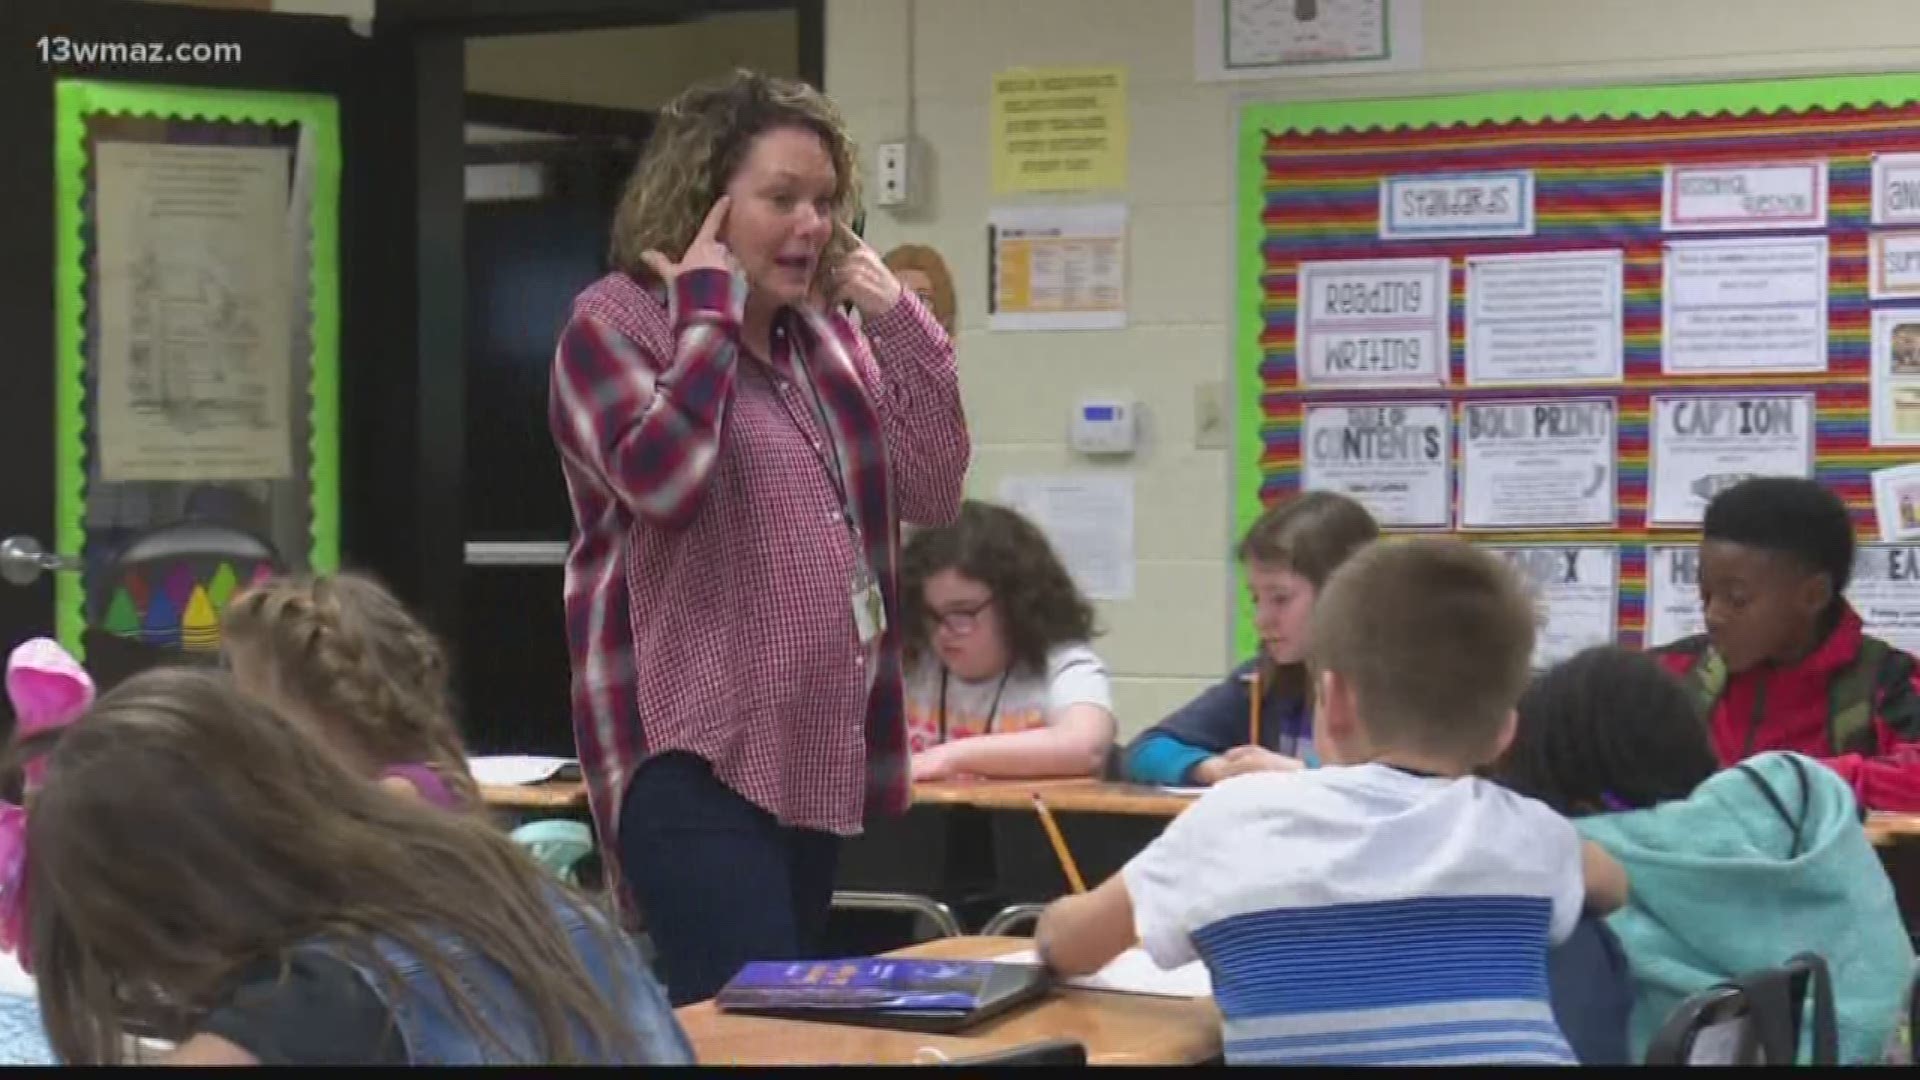 Students at one central Georgia school are going above and beyond to make sure one of their classmates feels included.